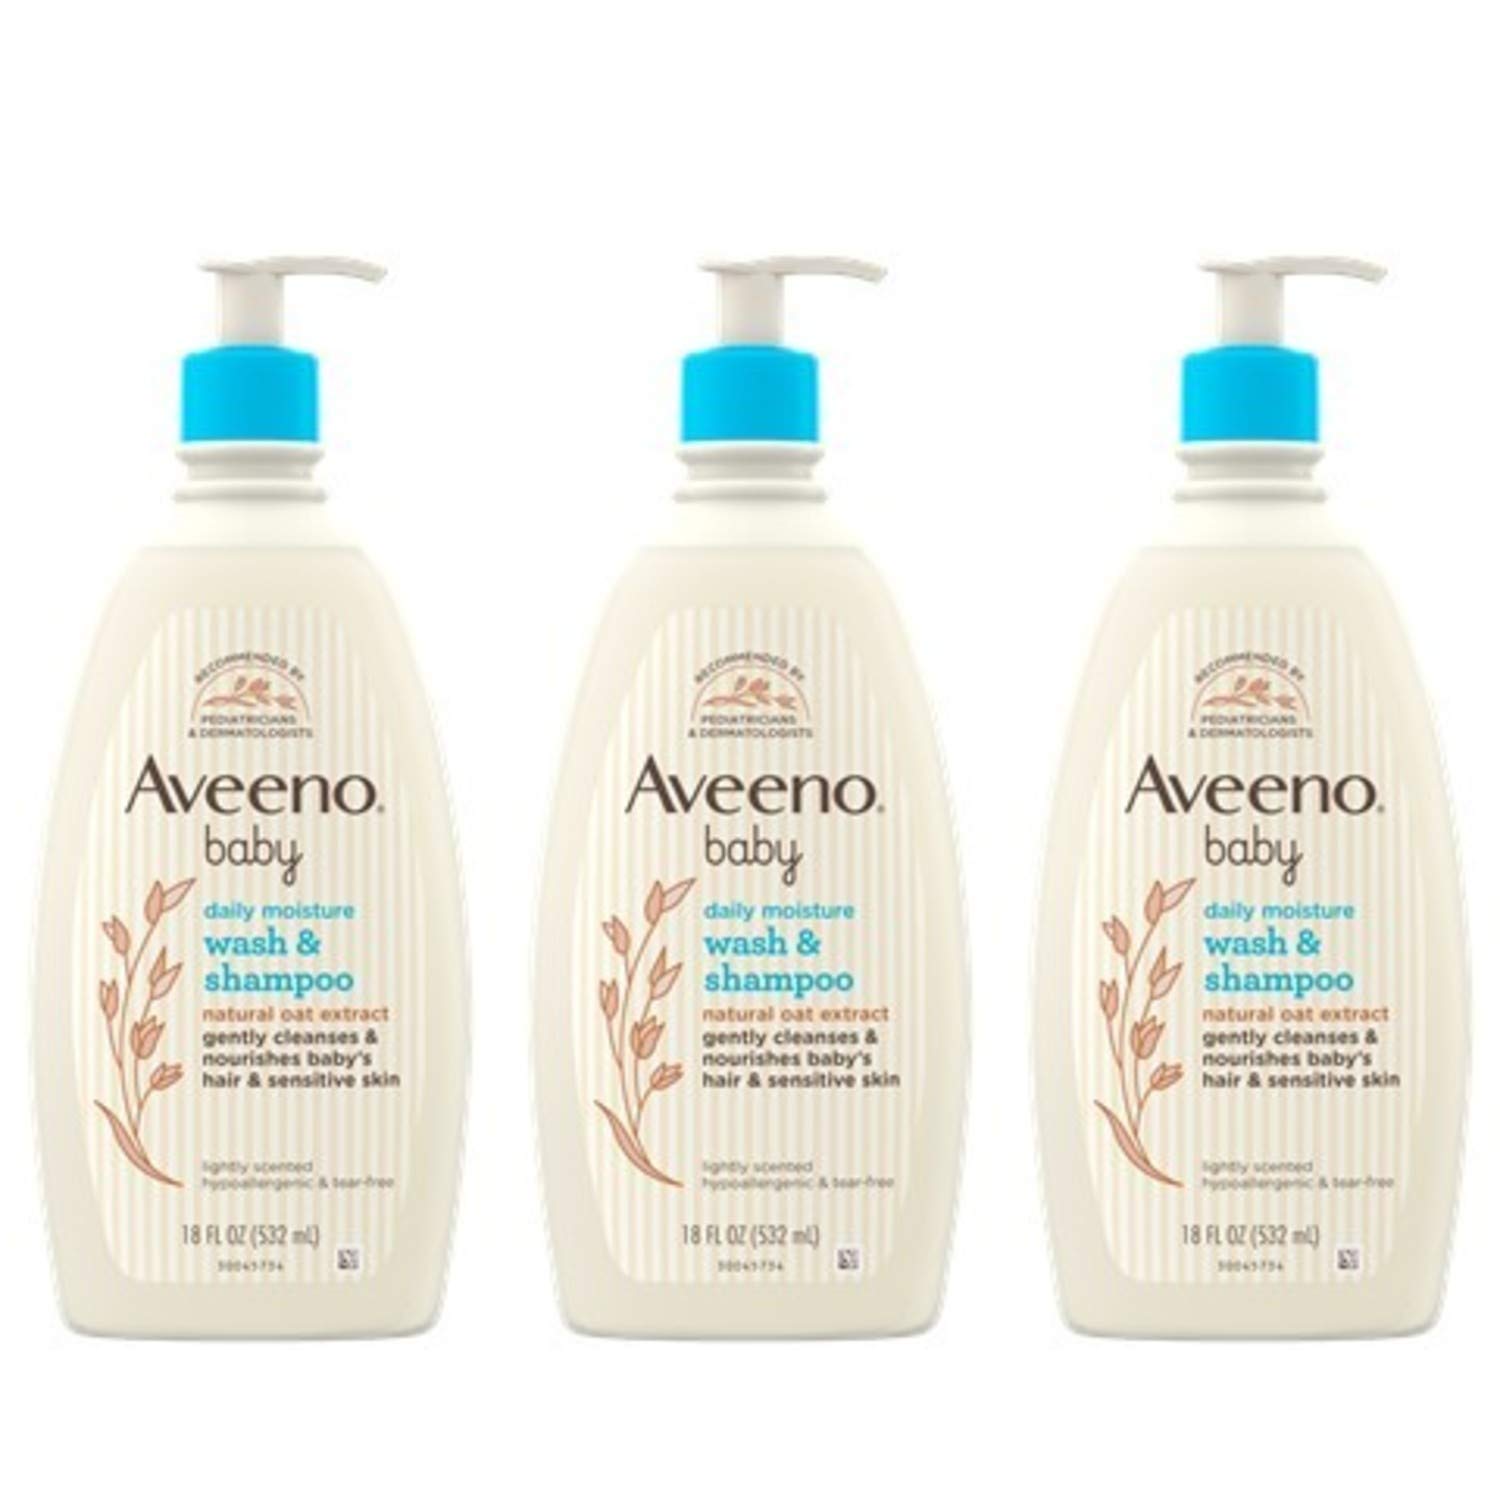 Aveeno Baby Daily Moisture gentle Bath Wash & Shampoo with Natural Oat Extract, Hypoallergenic, Tear-Free & Paraben-Free Formula